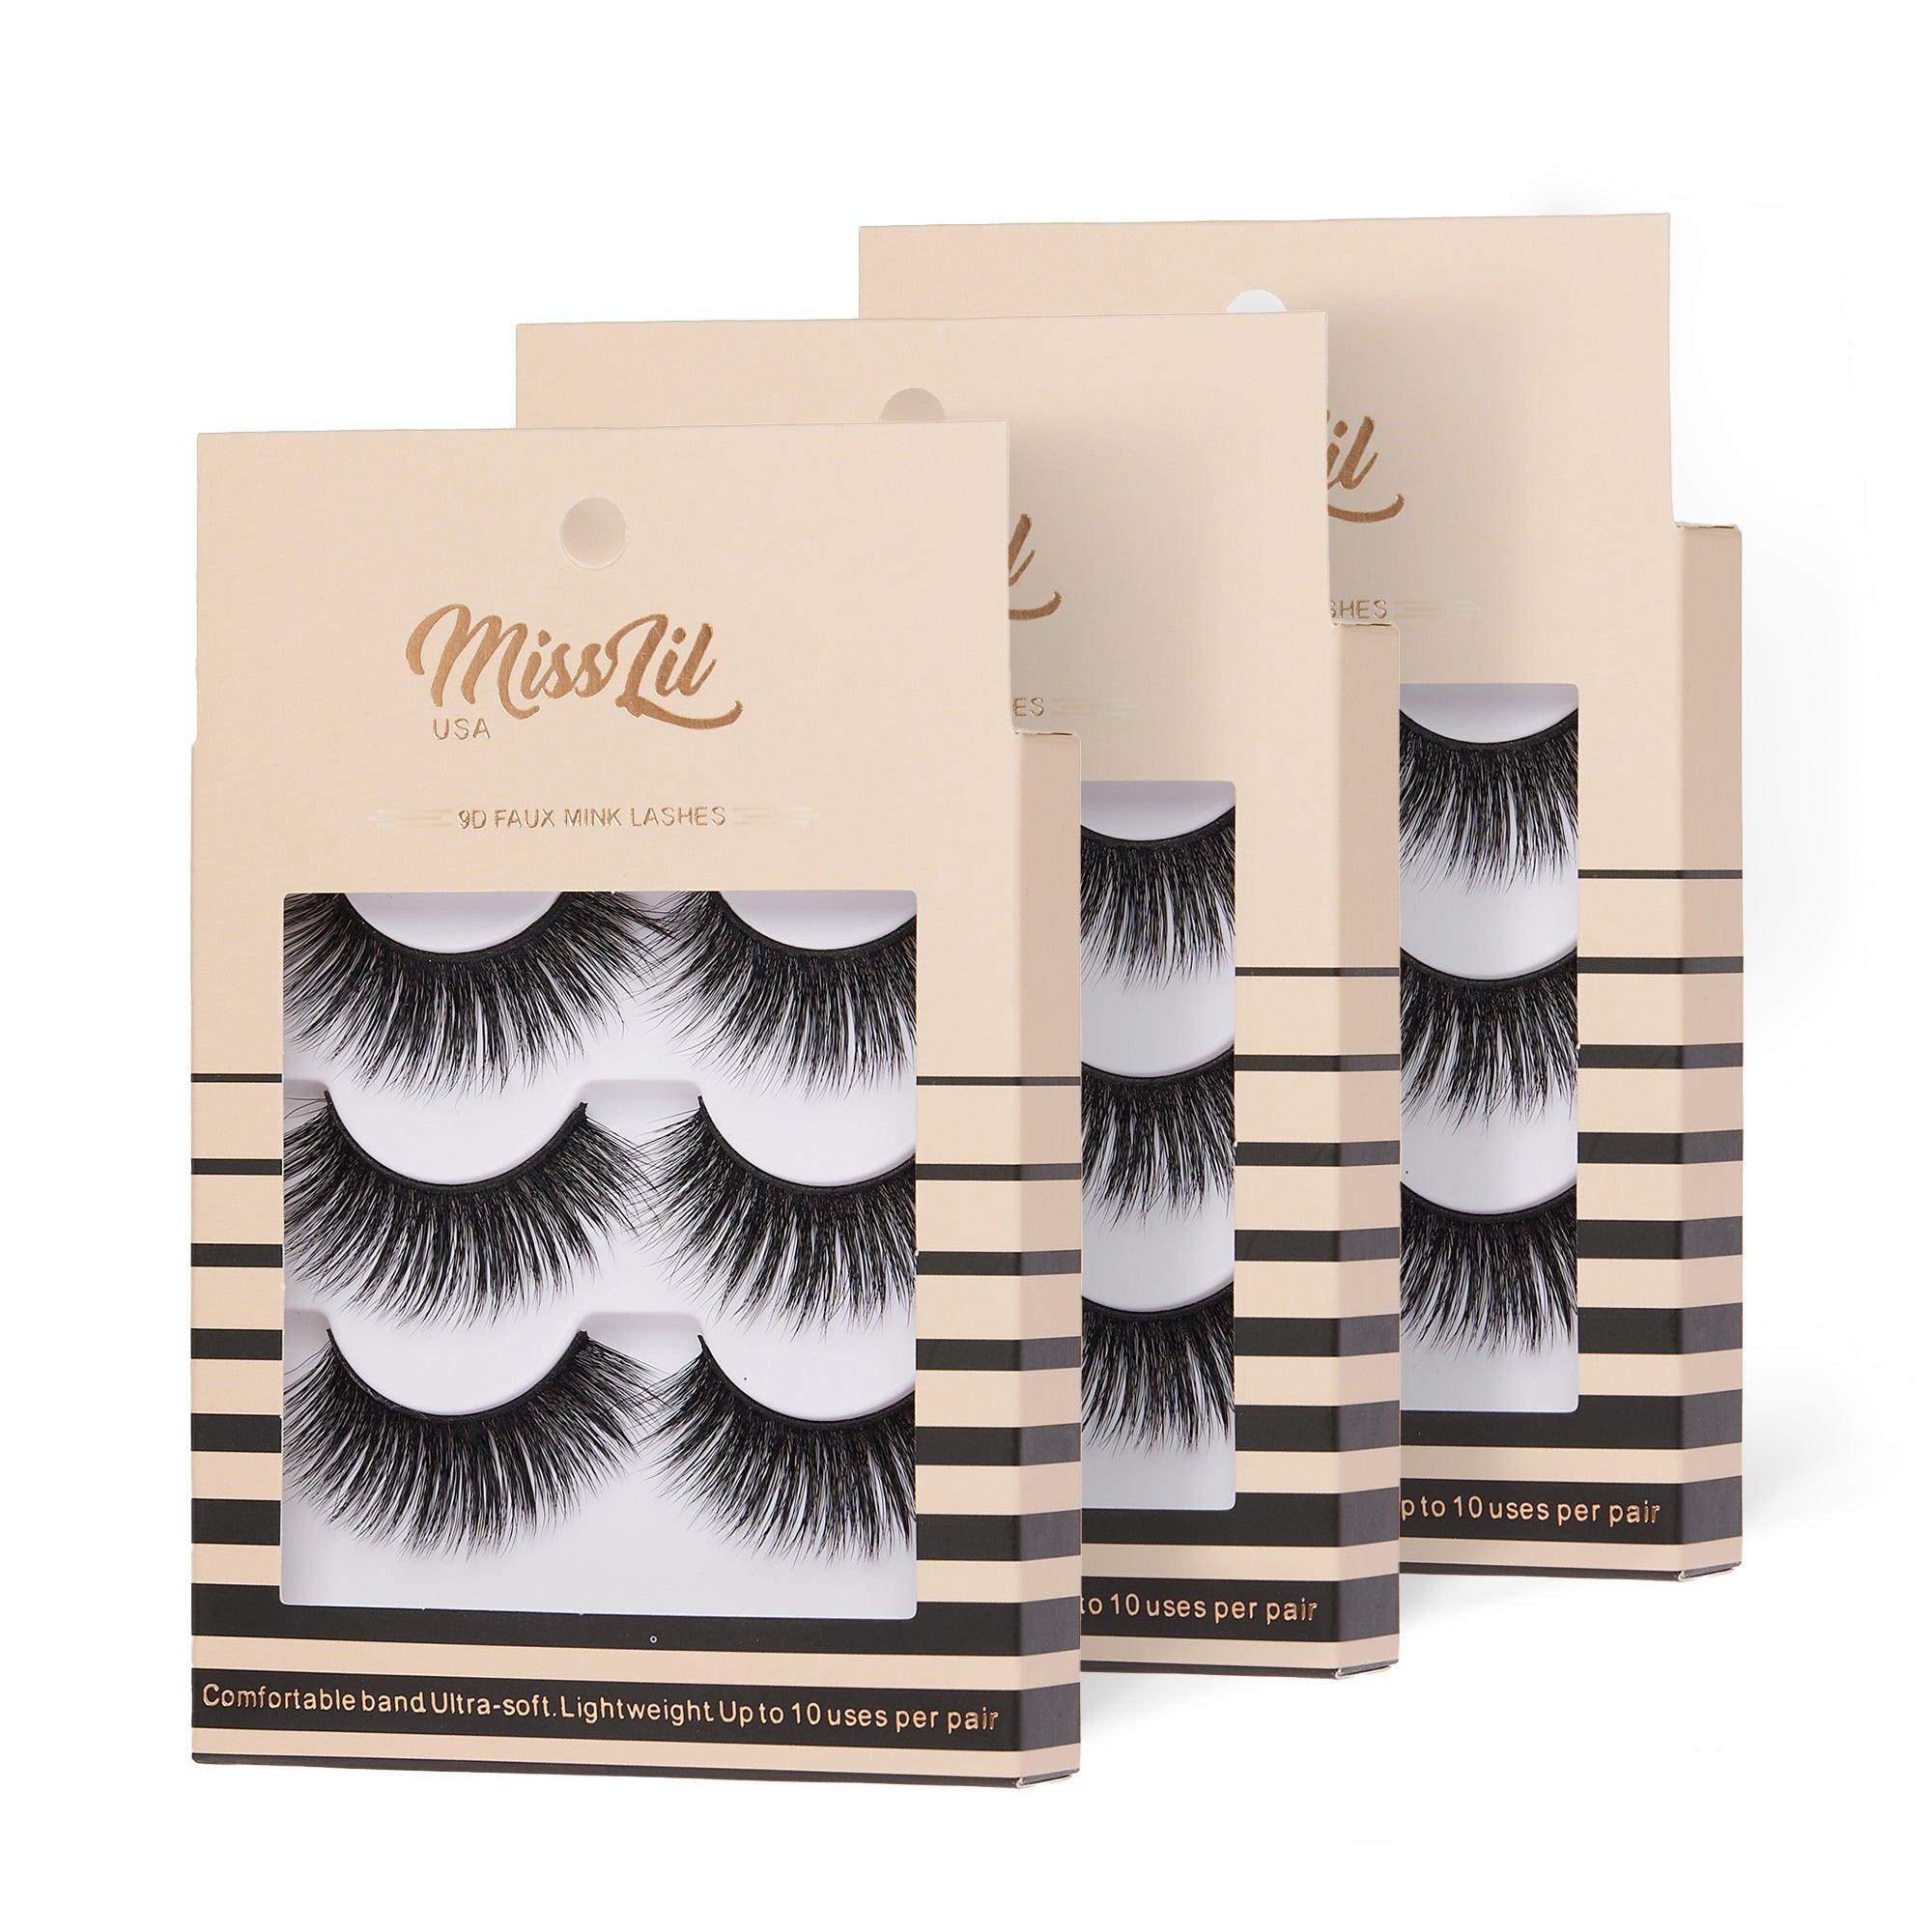 3-Pair Faux 9D Mink Eyelashes - Luxury Collection #24 - Pack of 12 - Miss Lil USA